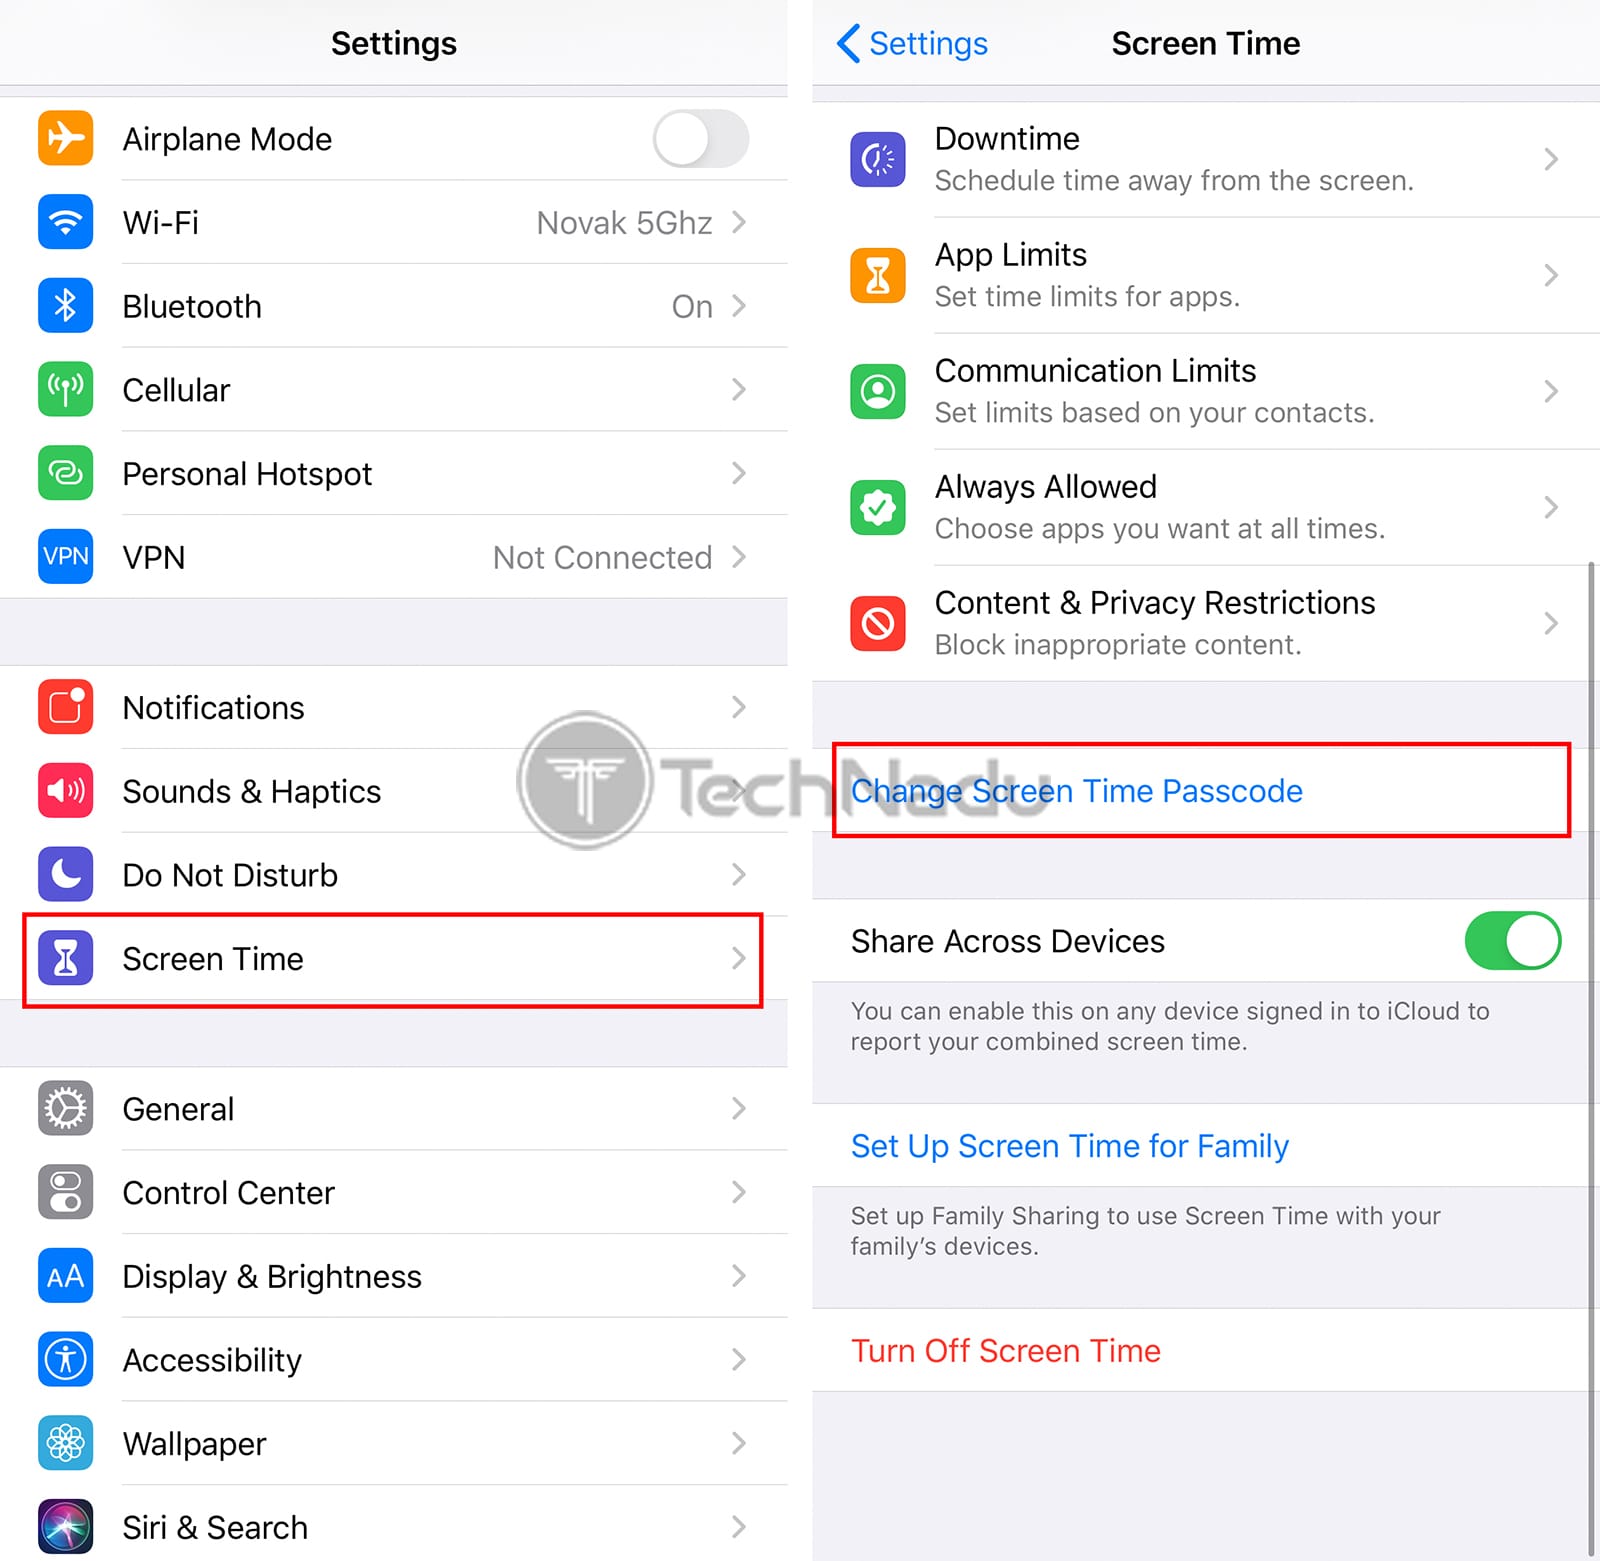 Reset or Turn Off Screen Time Passcode on iPhone & iPad